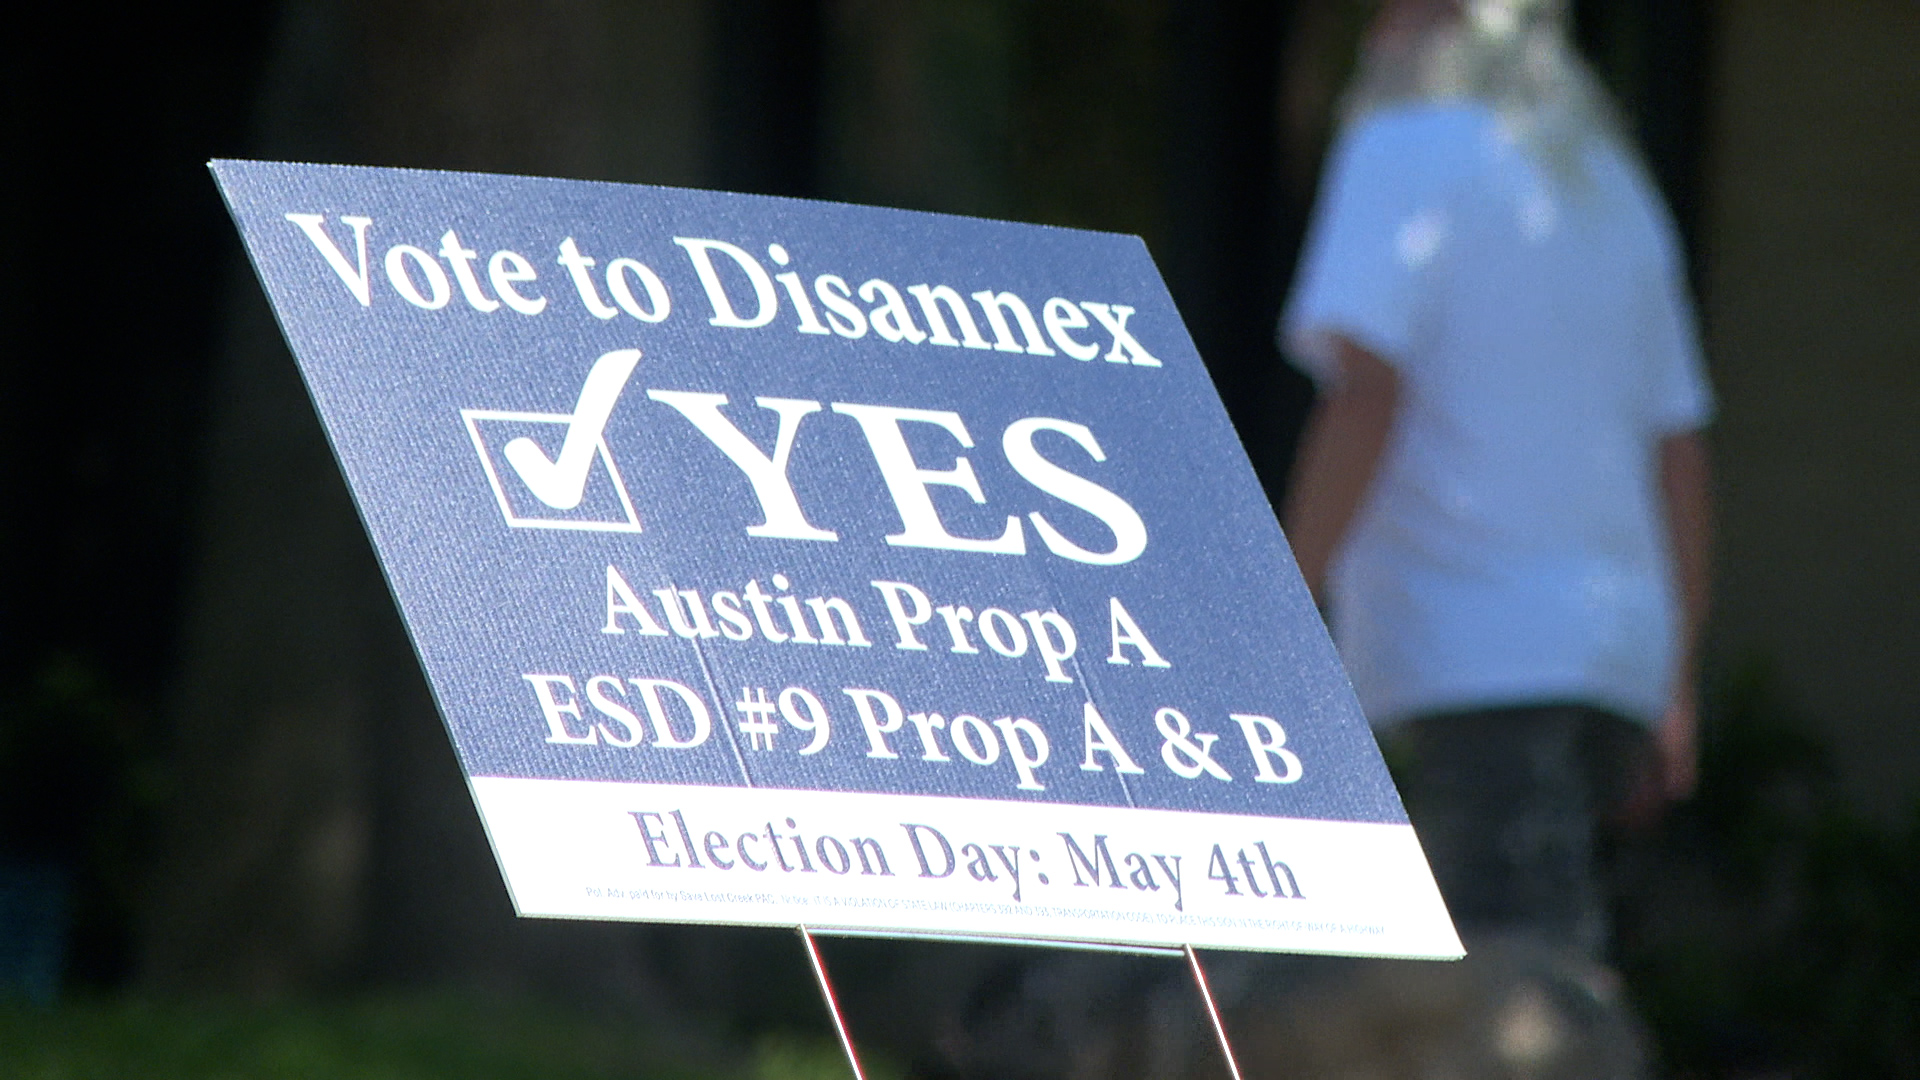 A sign encouraging people to vote for disannexation in Lost Creek